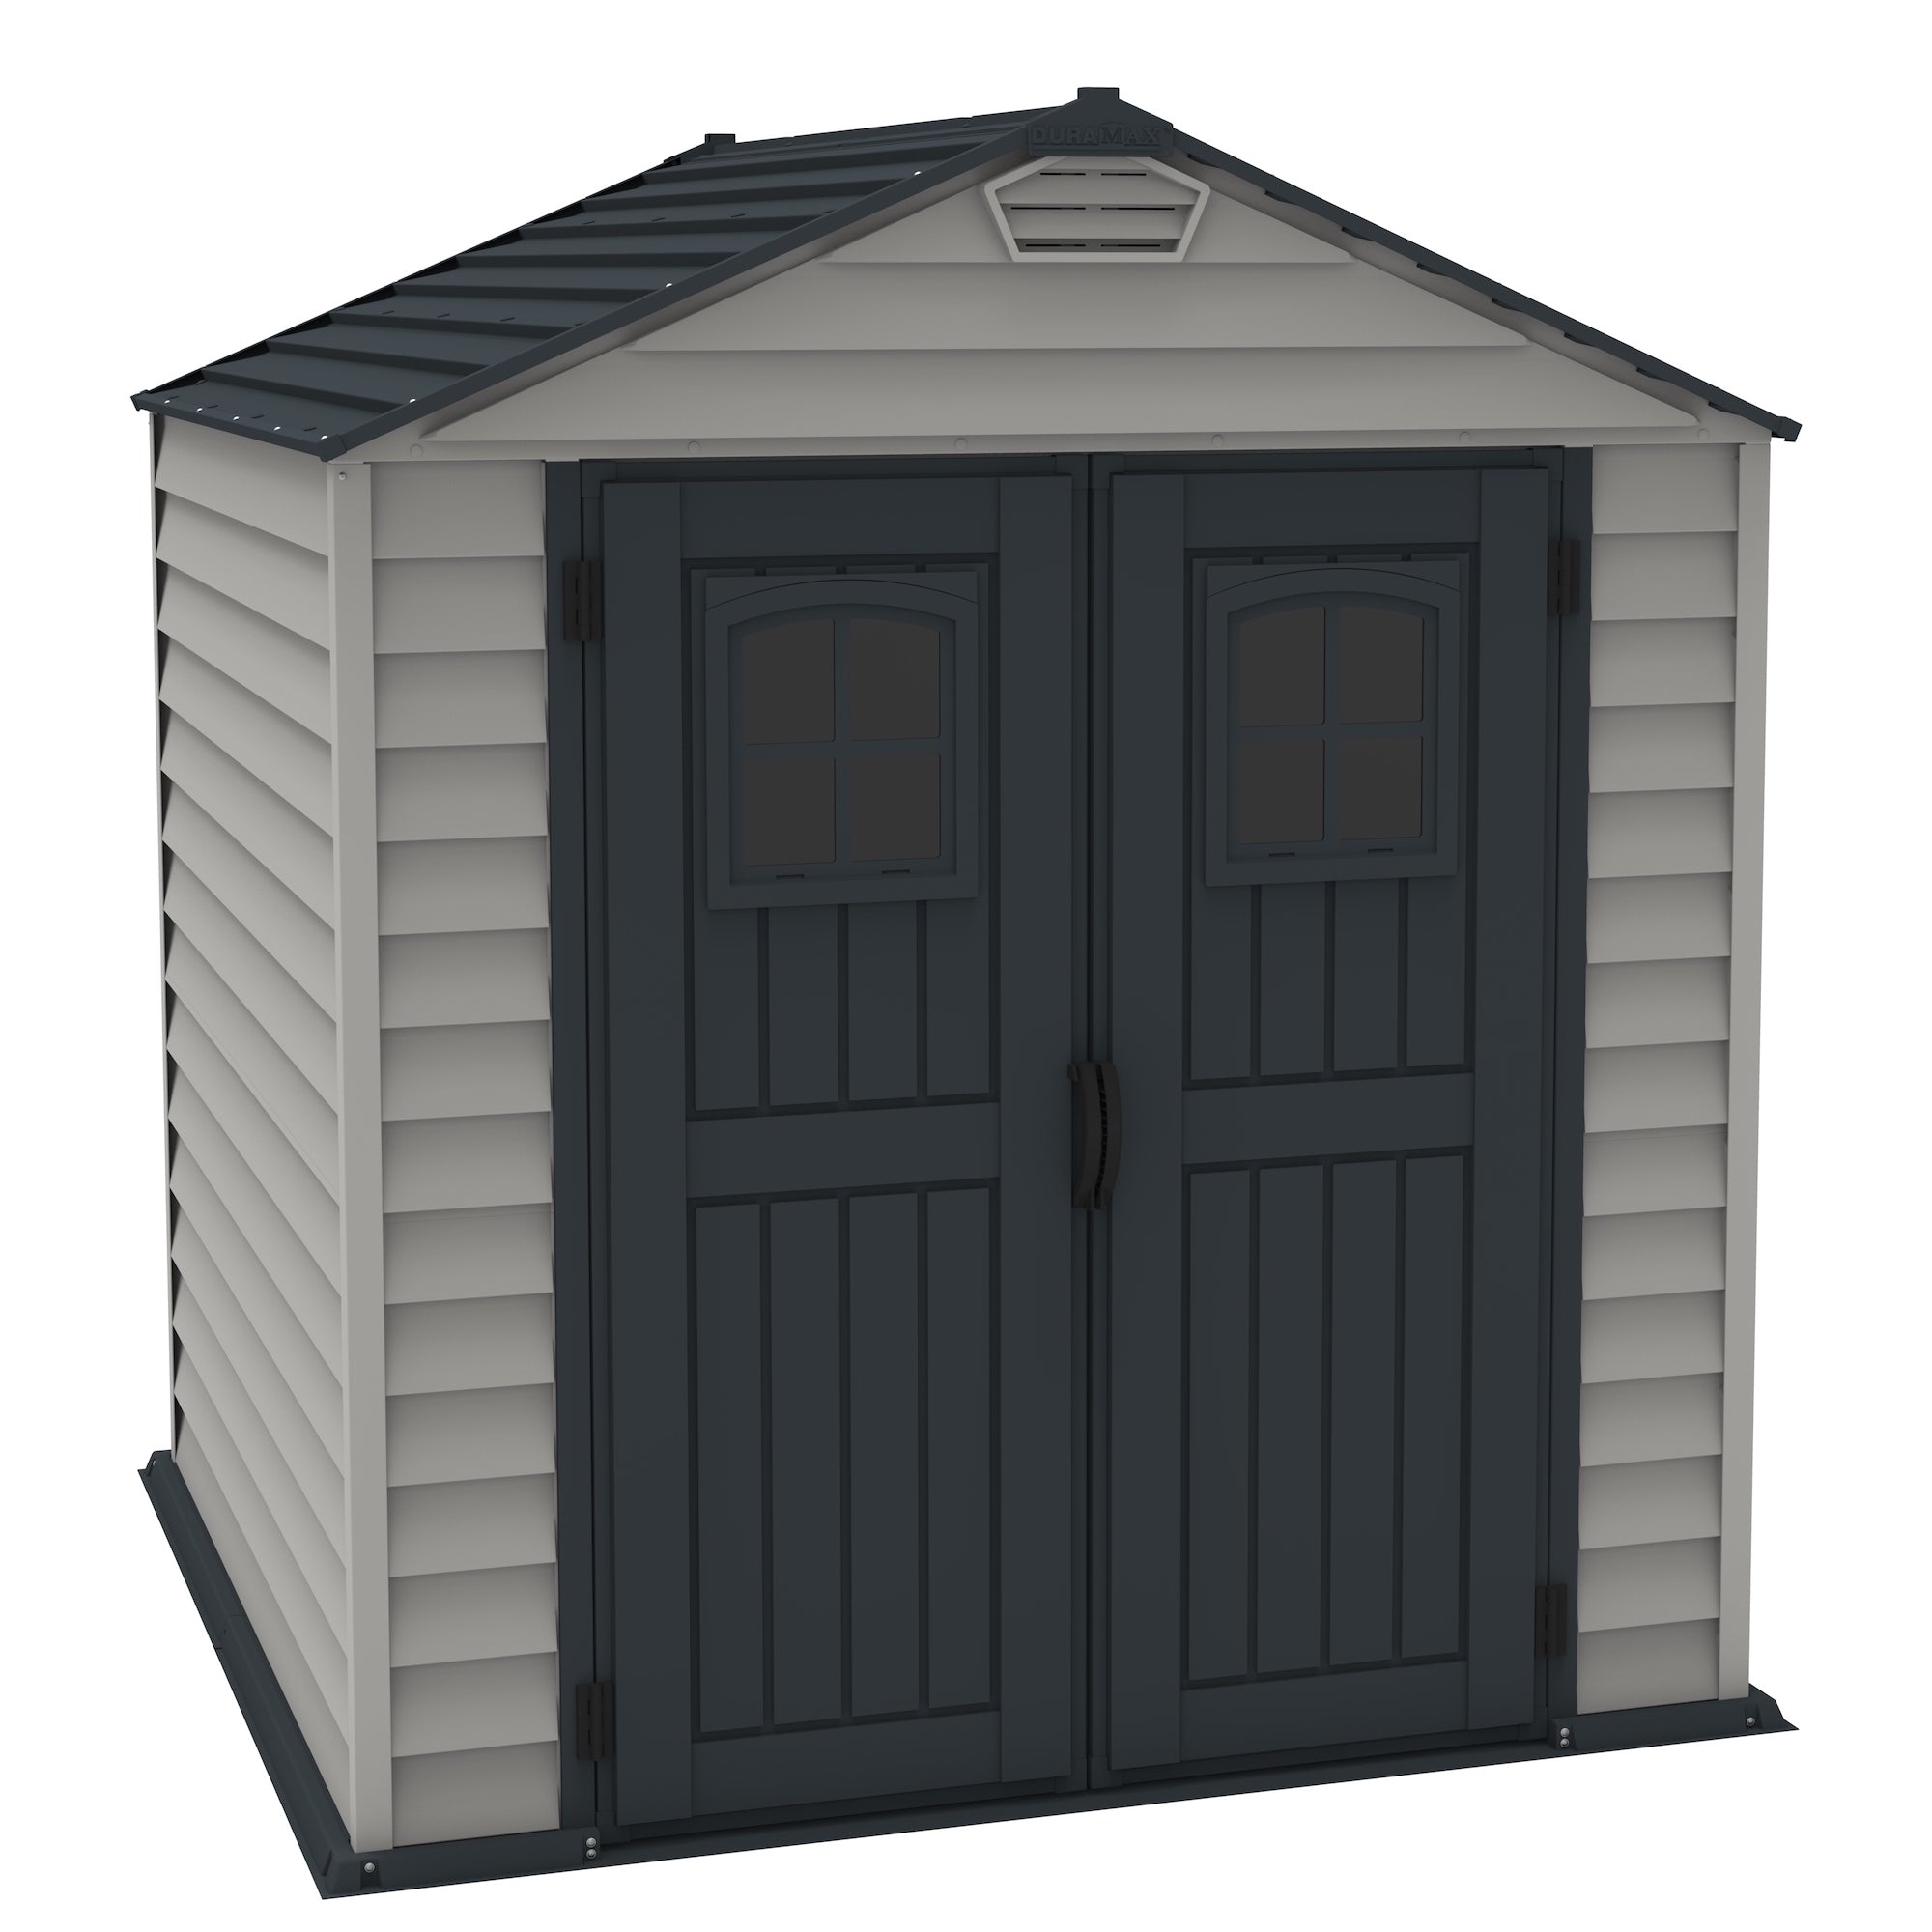 Frontal view of Duramax 7x7 StoreMax Plus Vinyl Shed with molded floor, featuring dark contrasting doors and functional side vents.